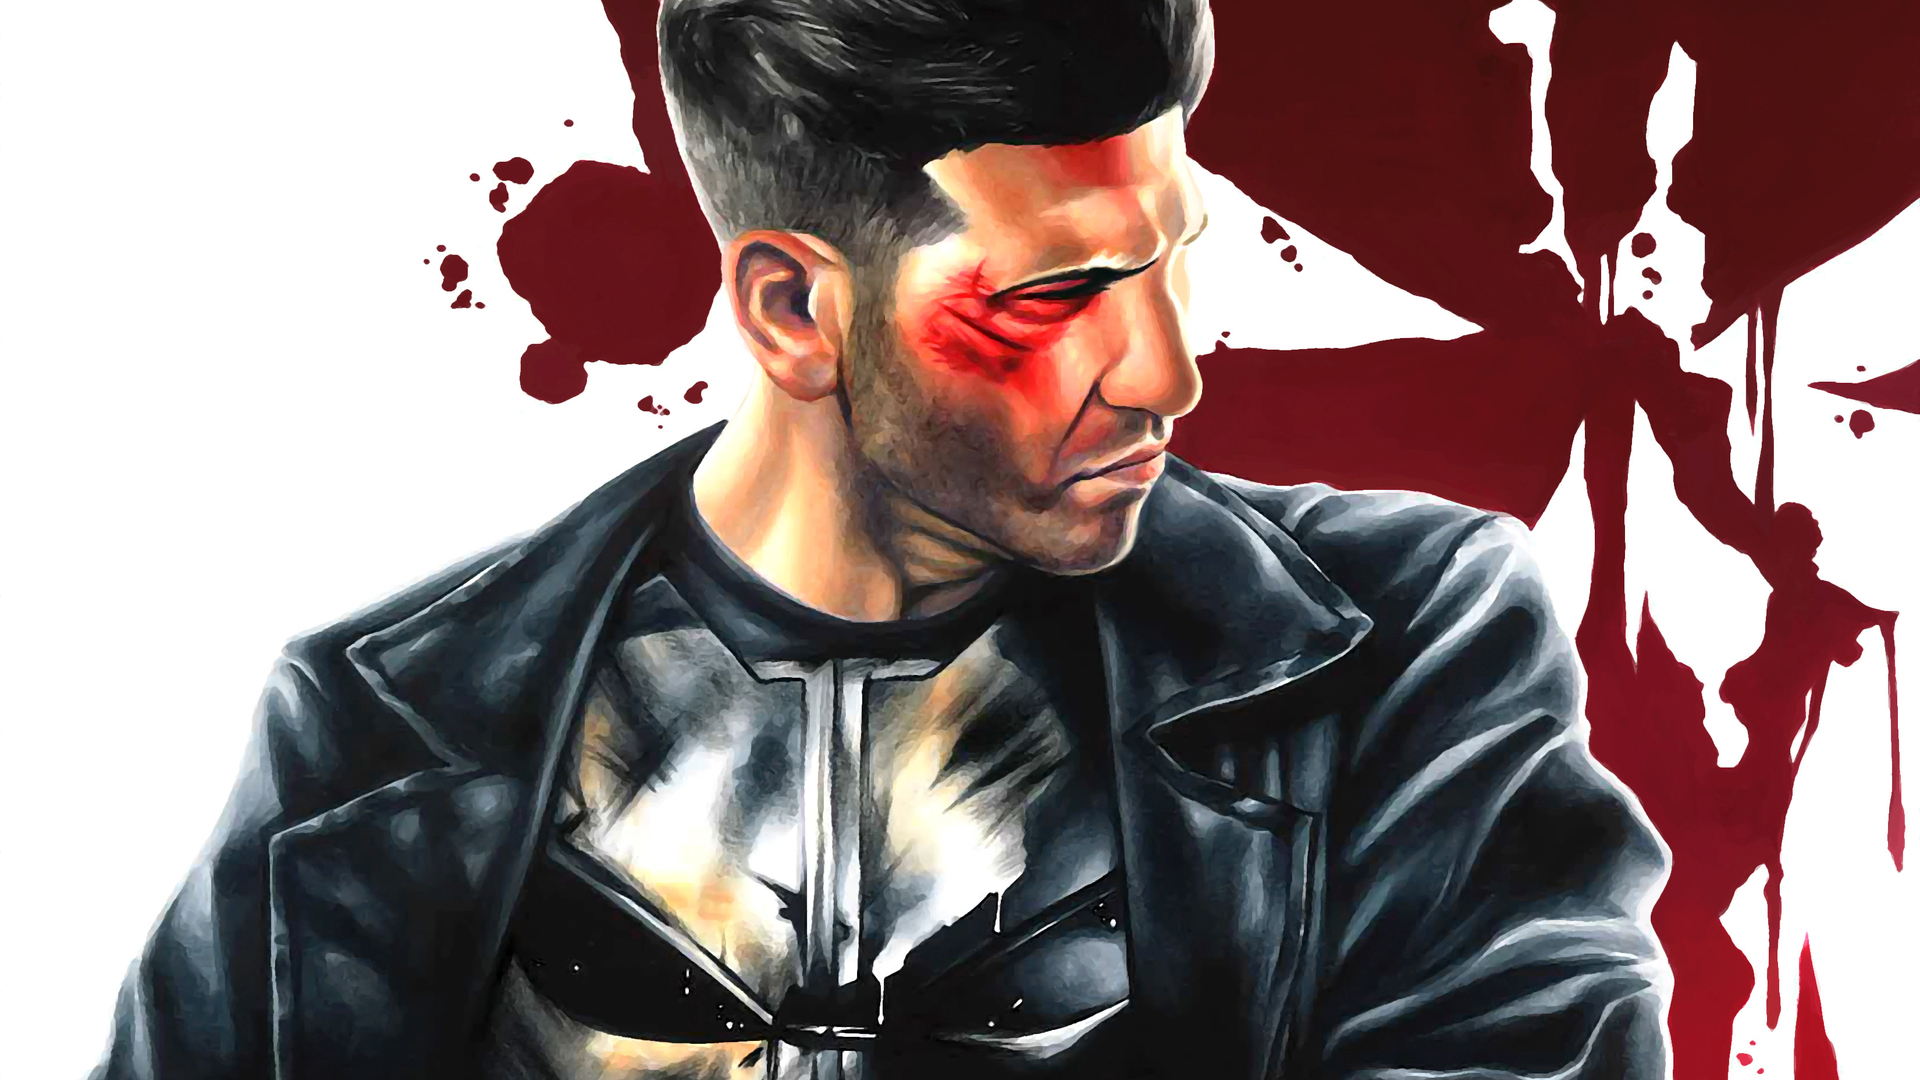 1920x1080 The Punisher Fanart Laptop Full HD 1080P HD 4k Wallpapers,  Images, Backgrounds, Photos and Pictures